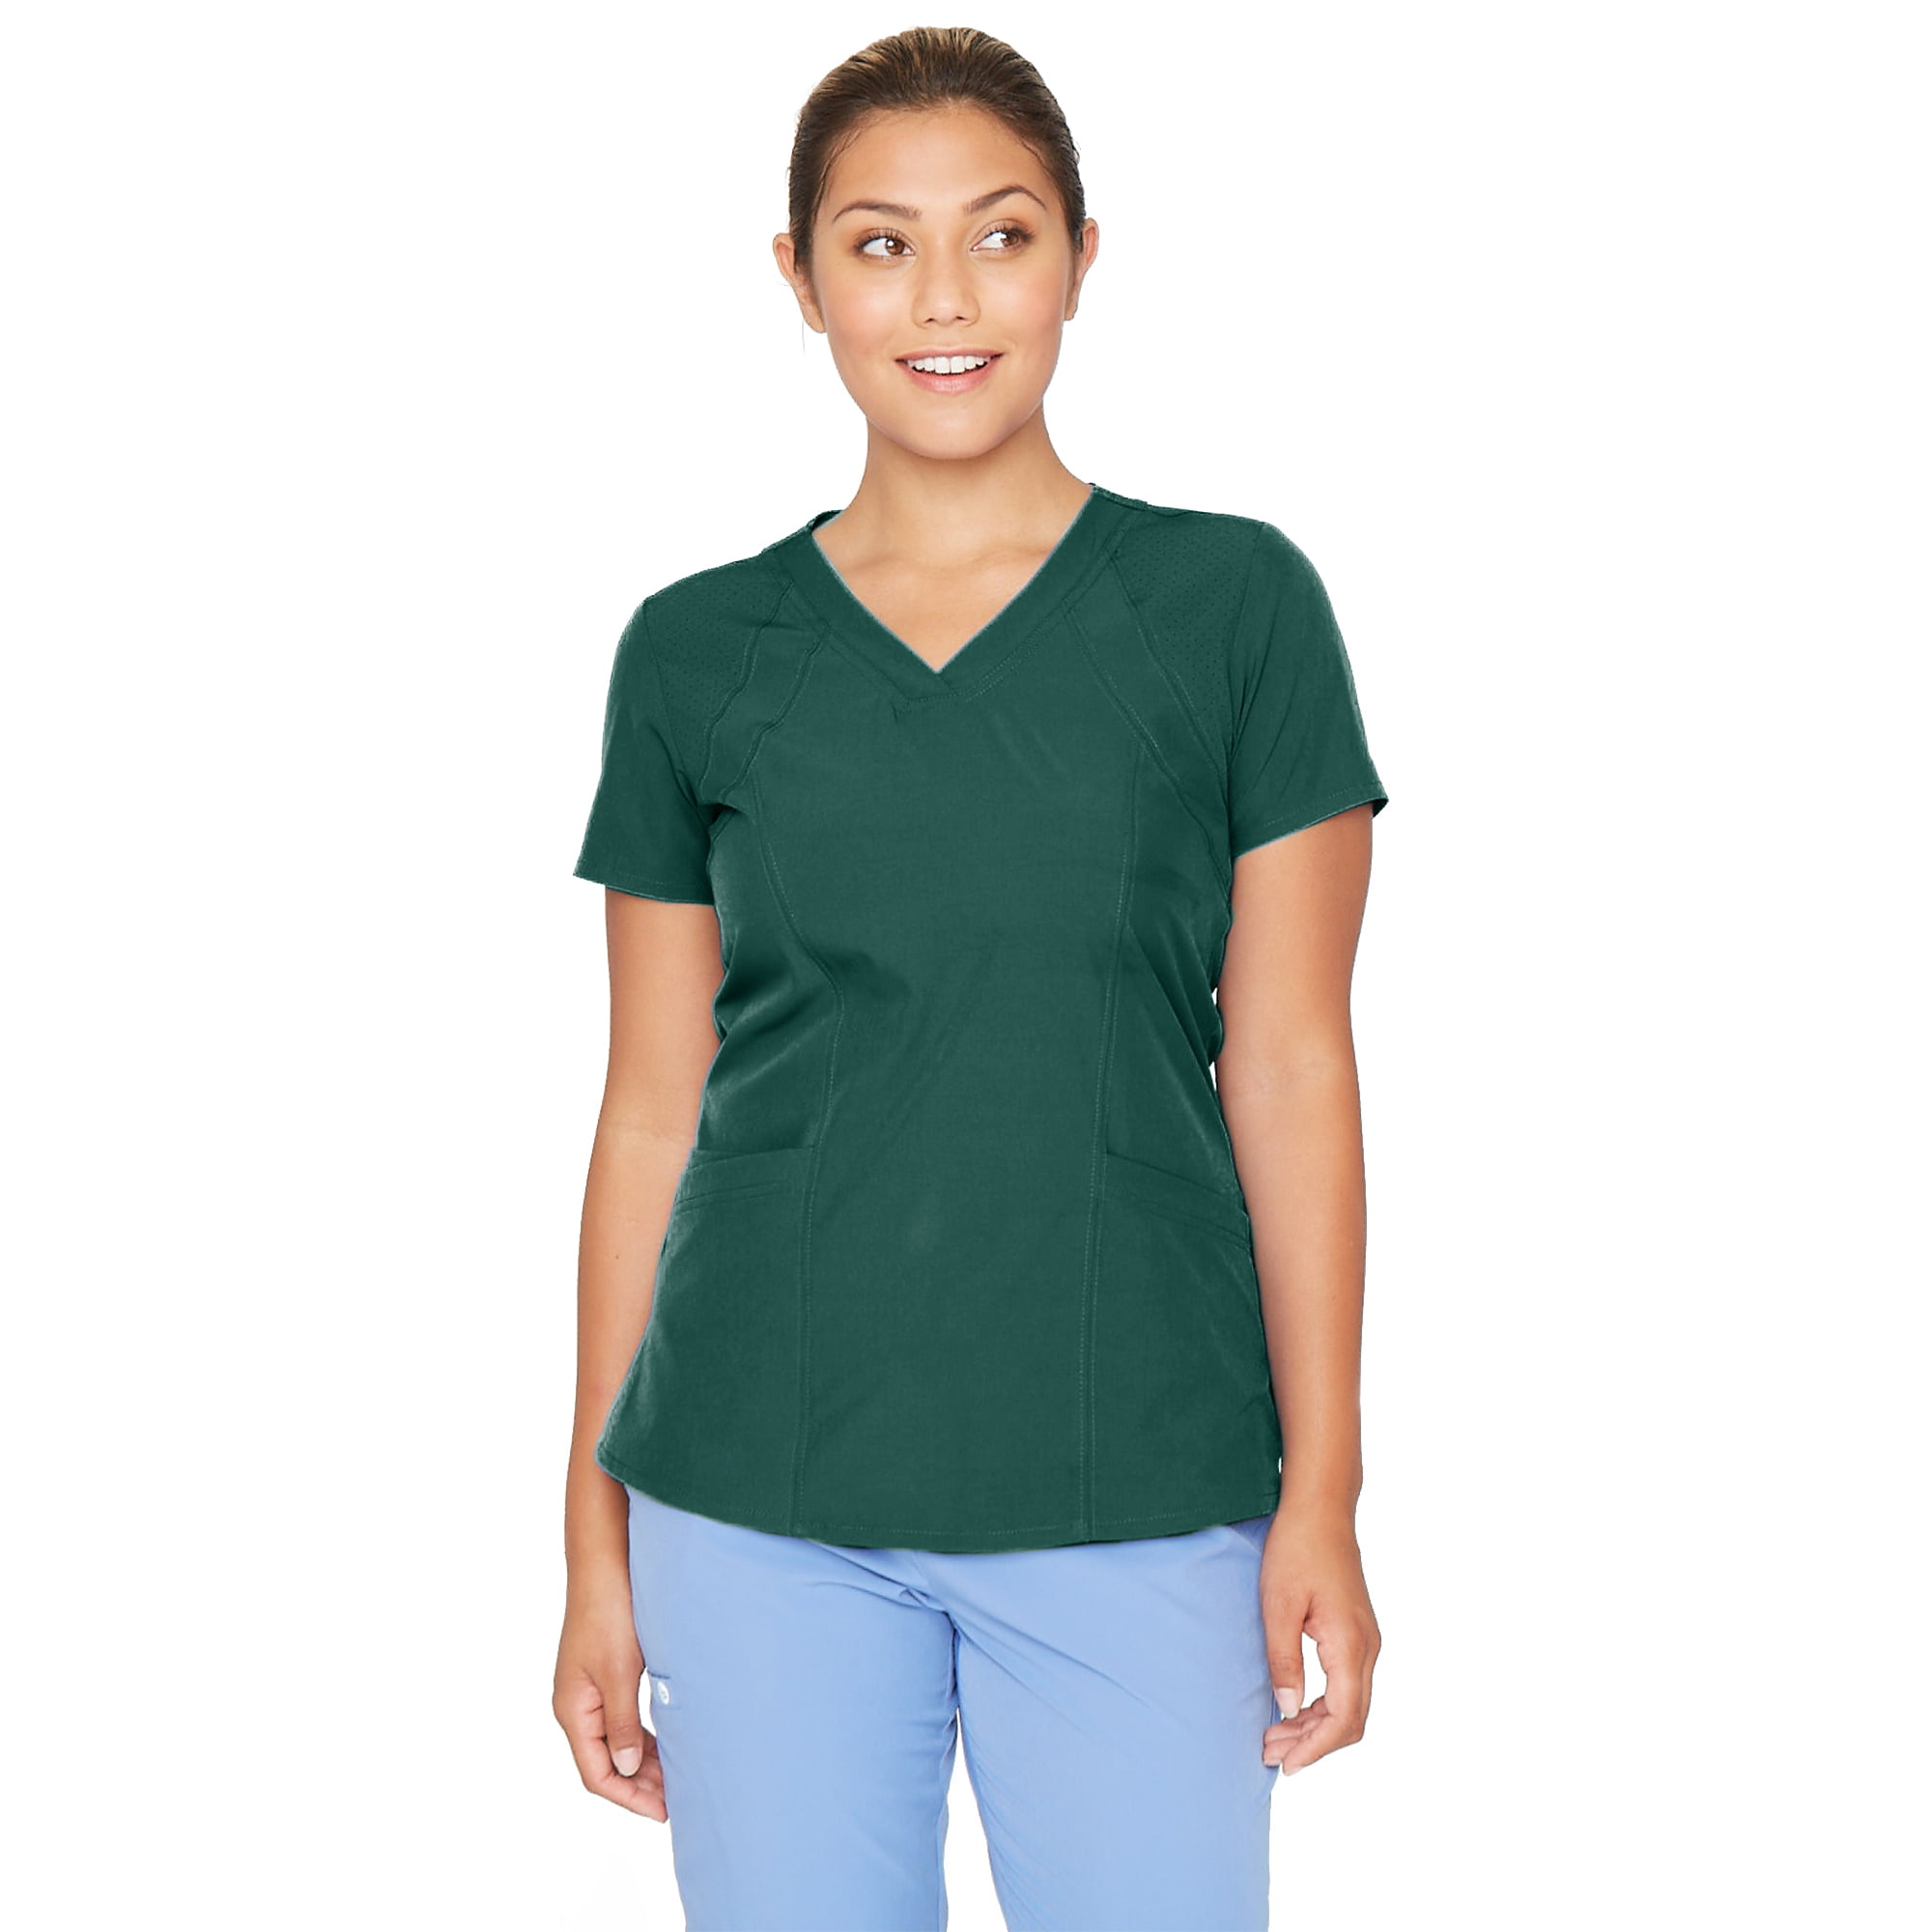 Women's Racer Top BARCO ONE V-Neck Medical Scrub Top w/ 4 Pockets and 360 Spandex Stretch Fabric 